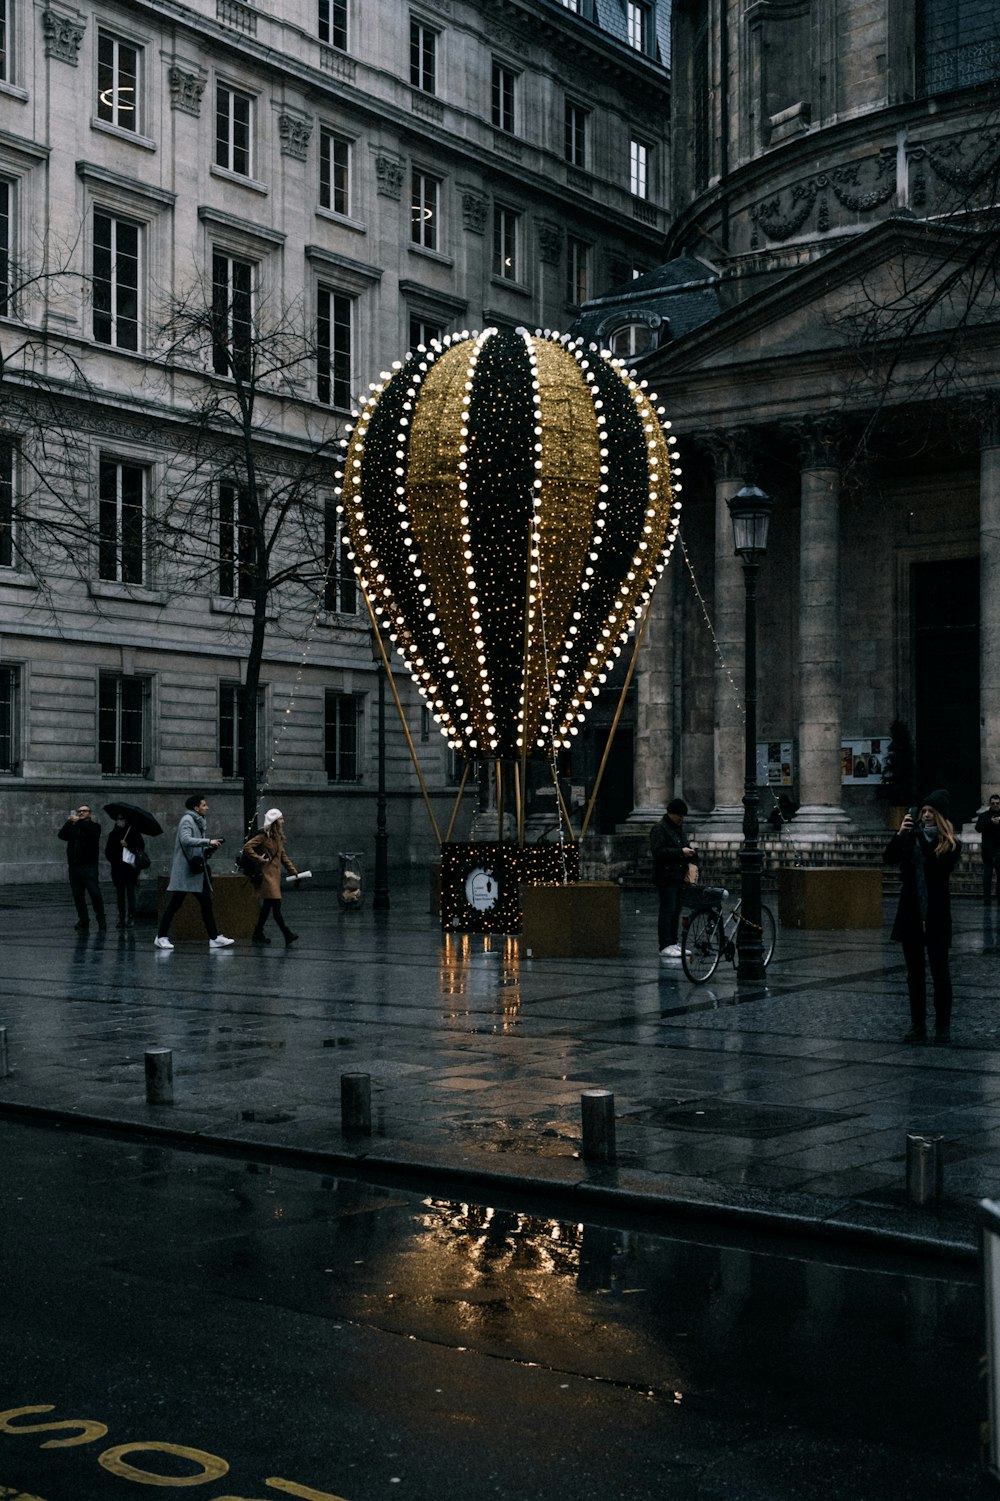 a lighted hot air balloon in the middle of a street